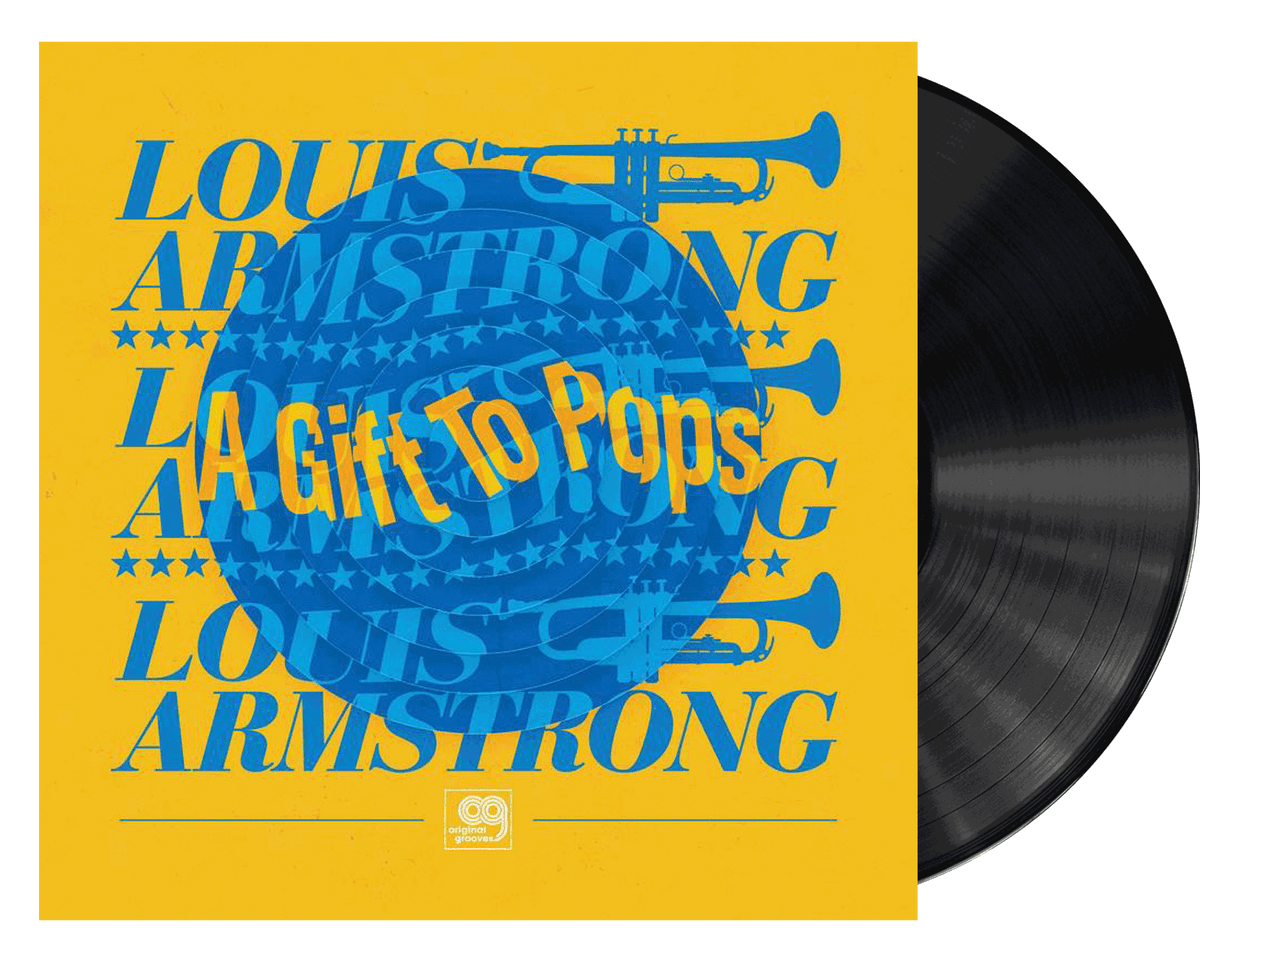 The Wonderful World of Louis Armstrong All Stars - A Gift to Pops (Vinyl LP)